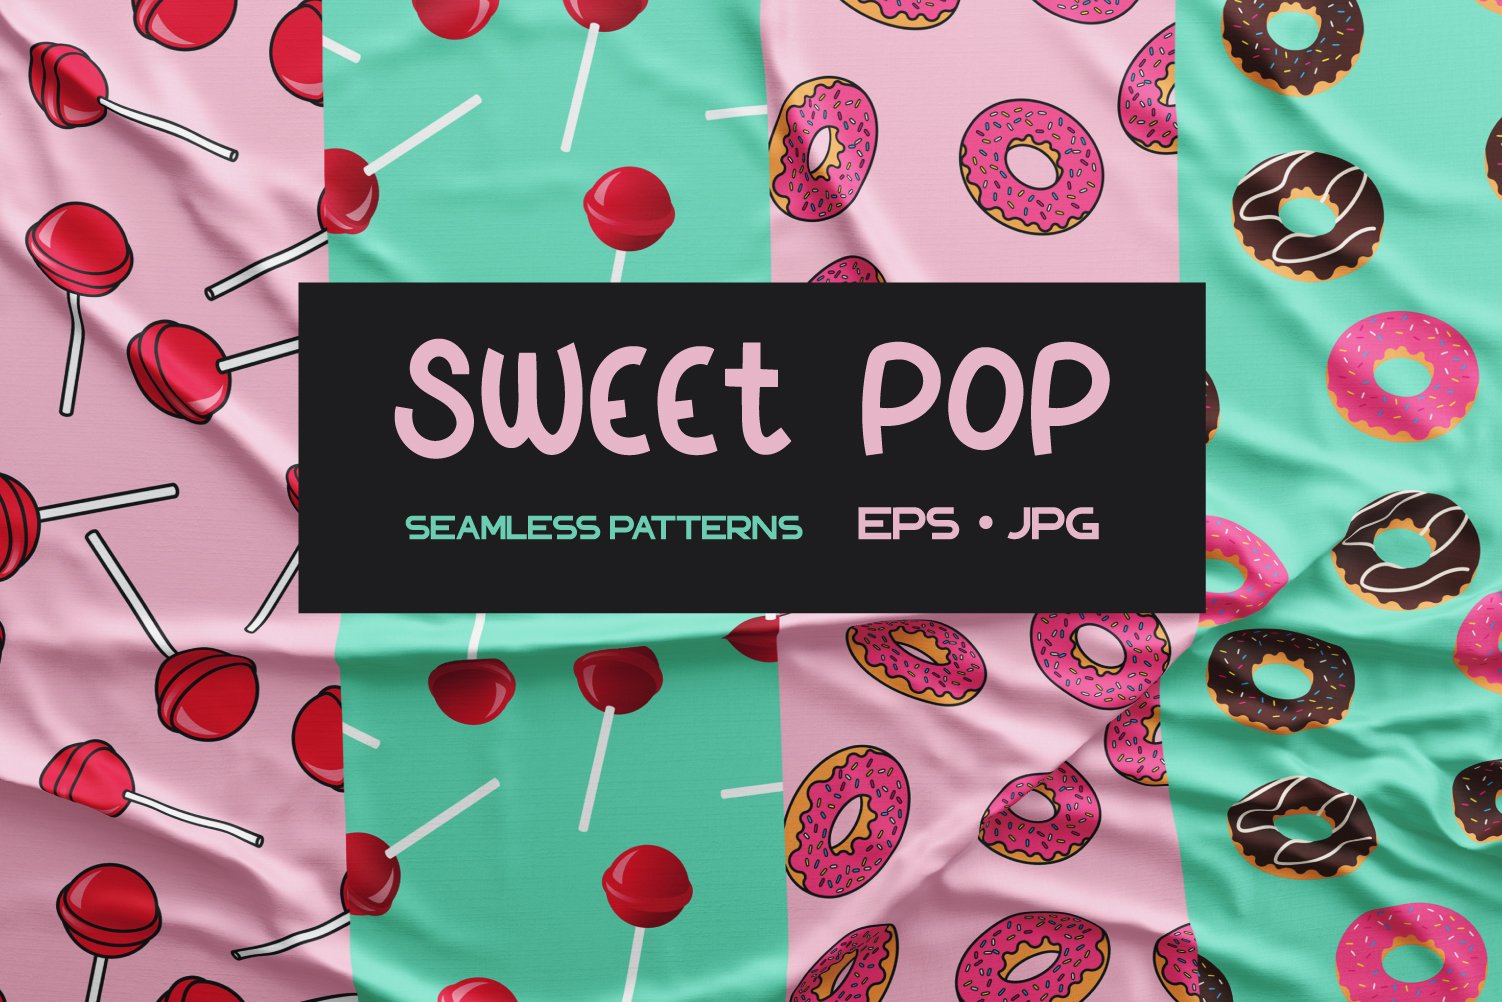 Donuts and lollipops patterns cover image.